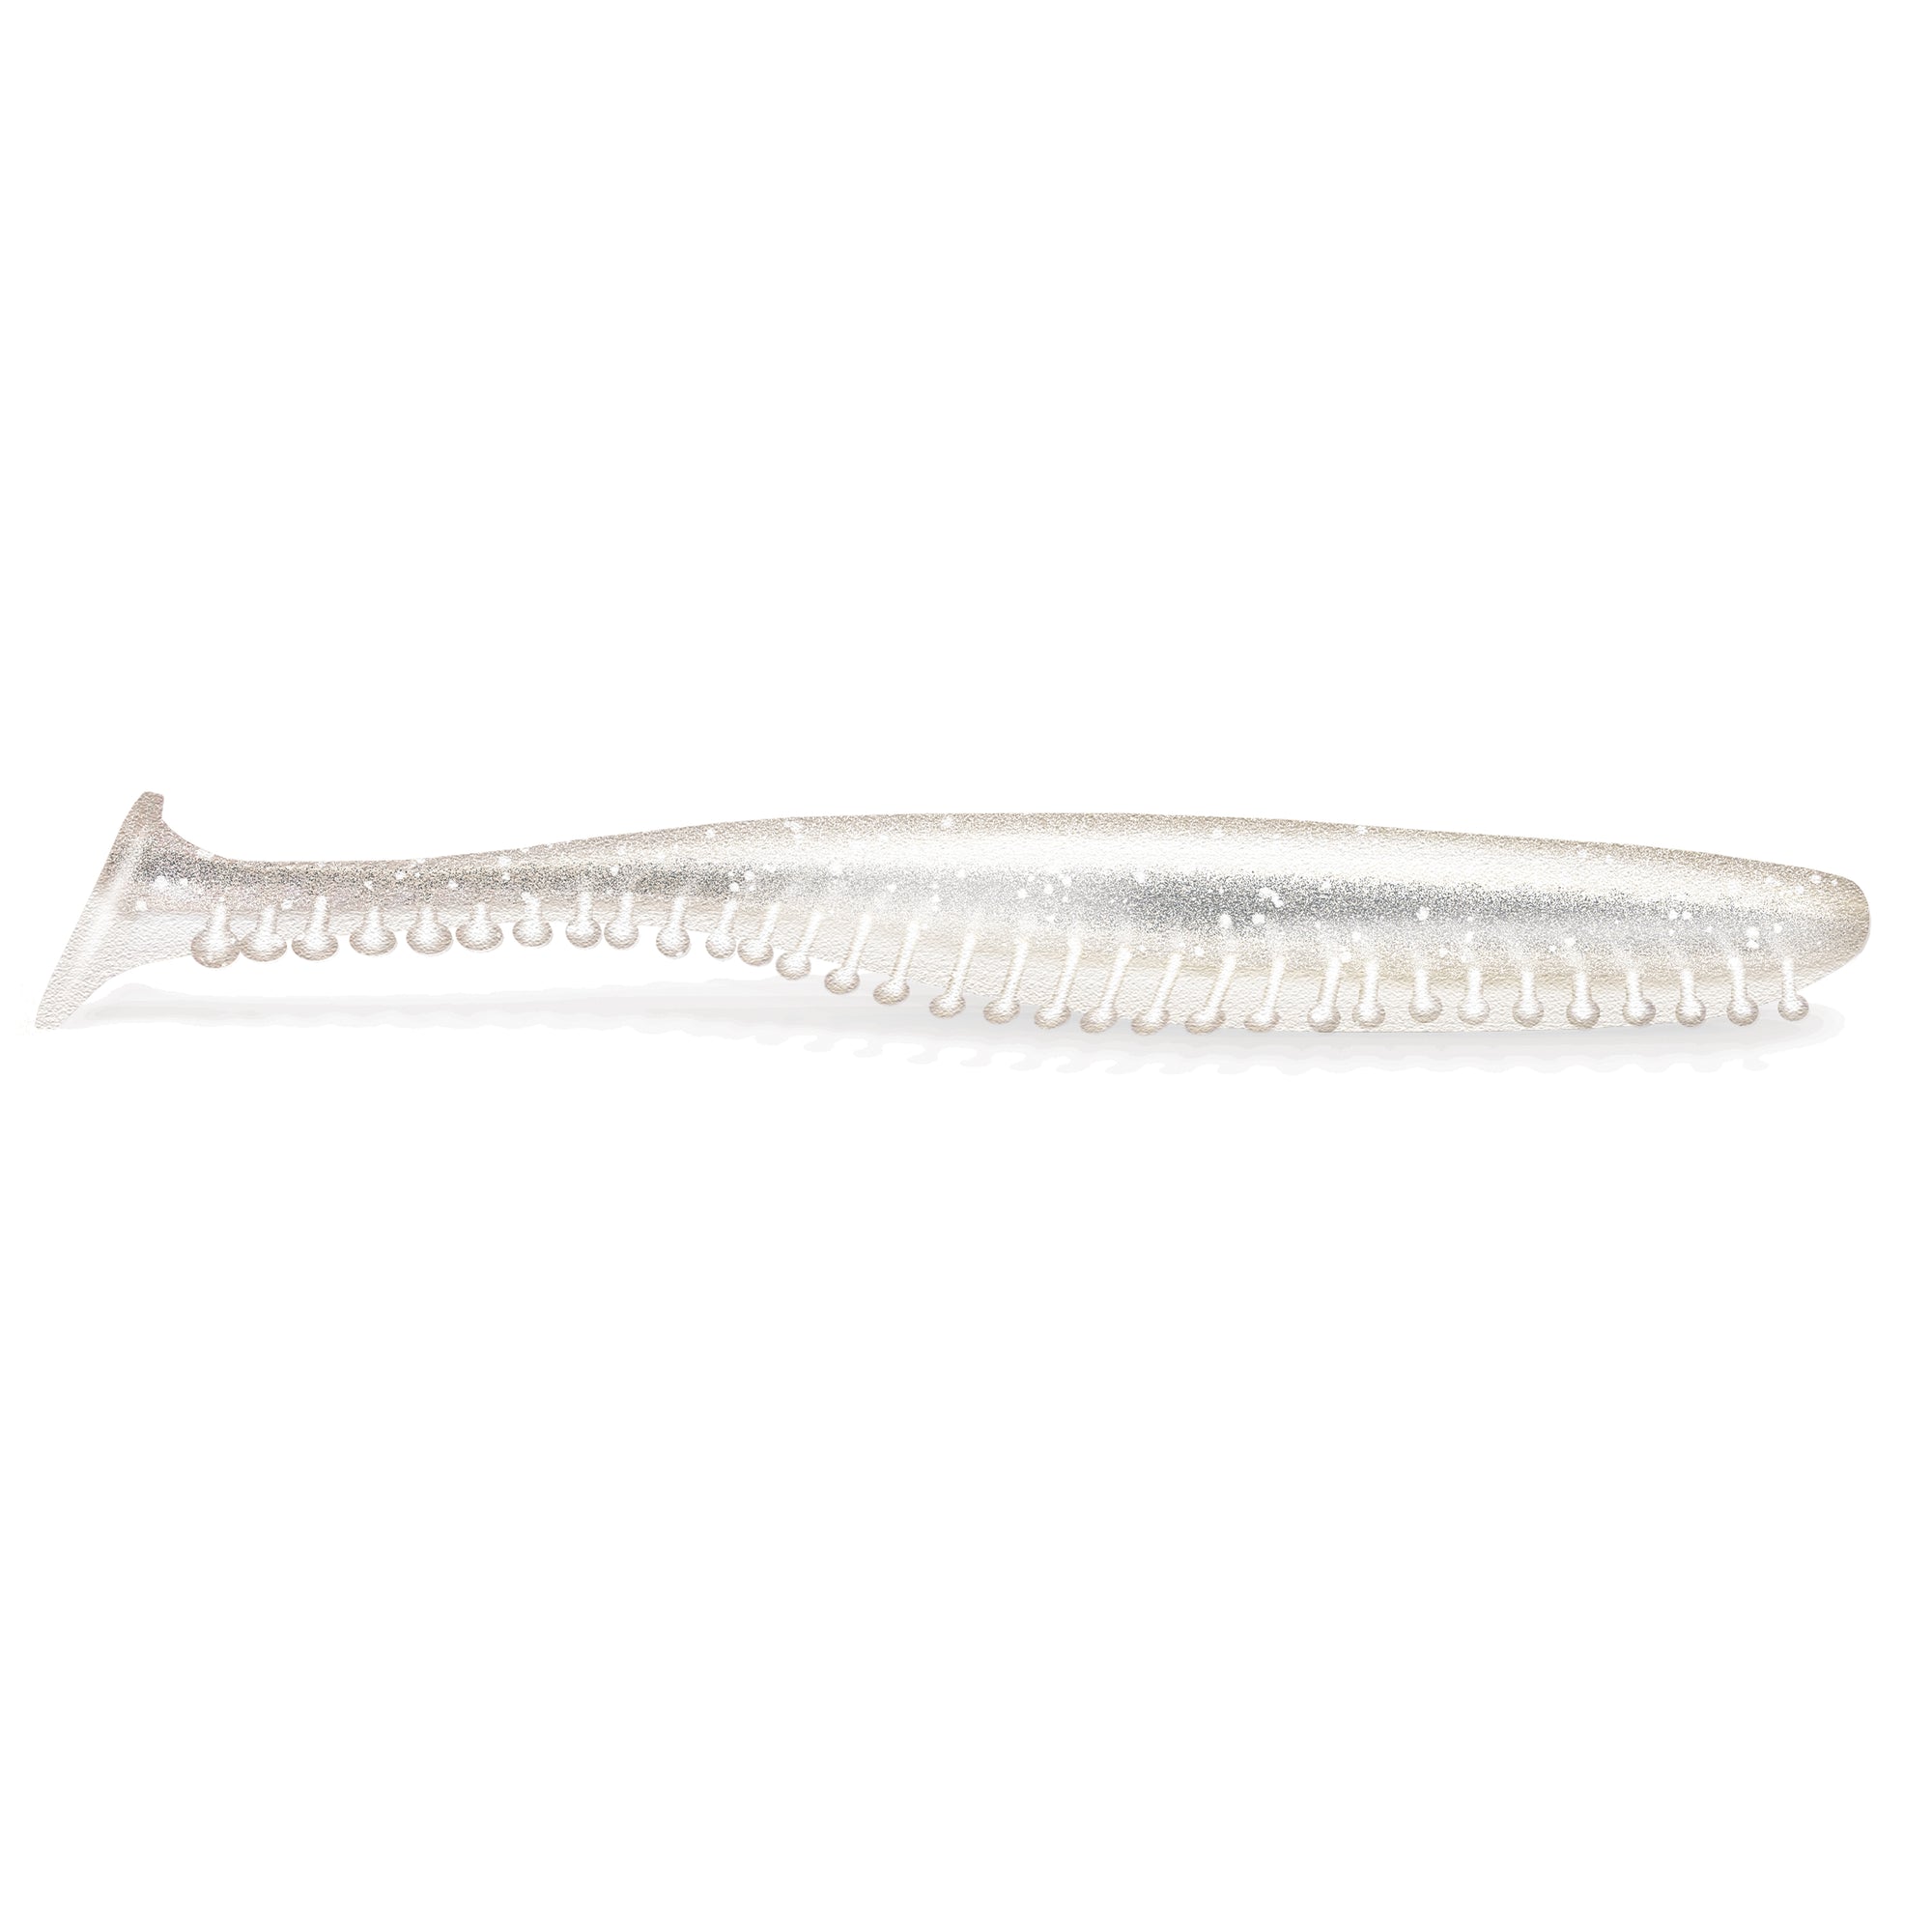 Kalin's 3.8 White Ice Tickle Shad